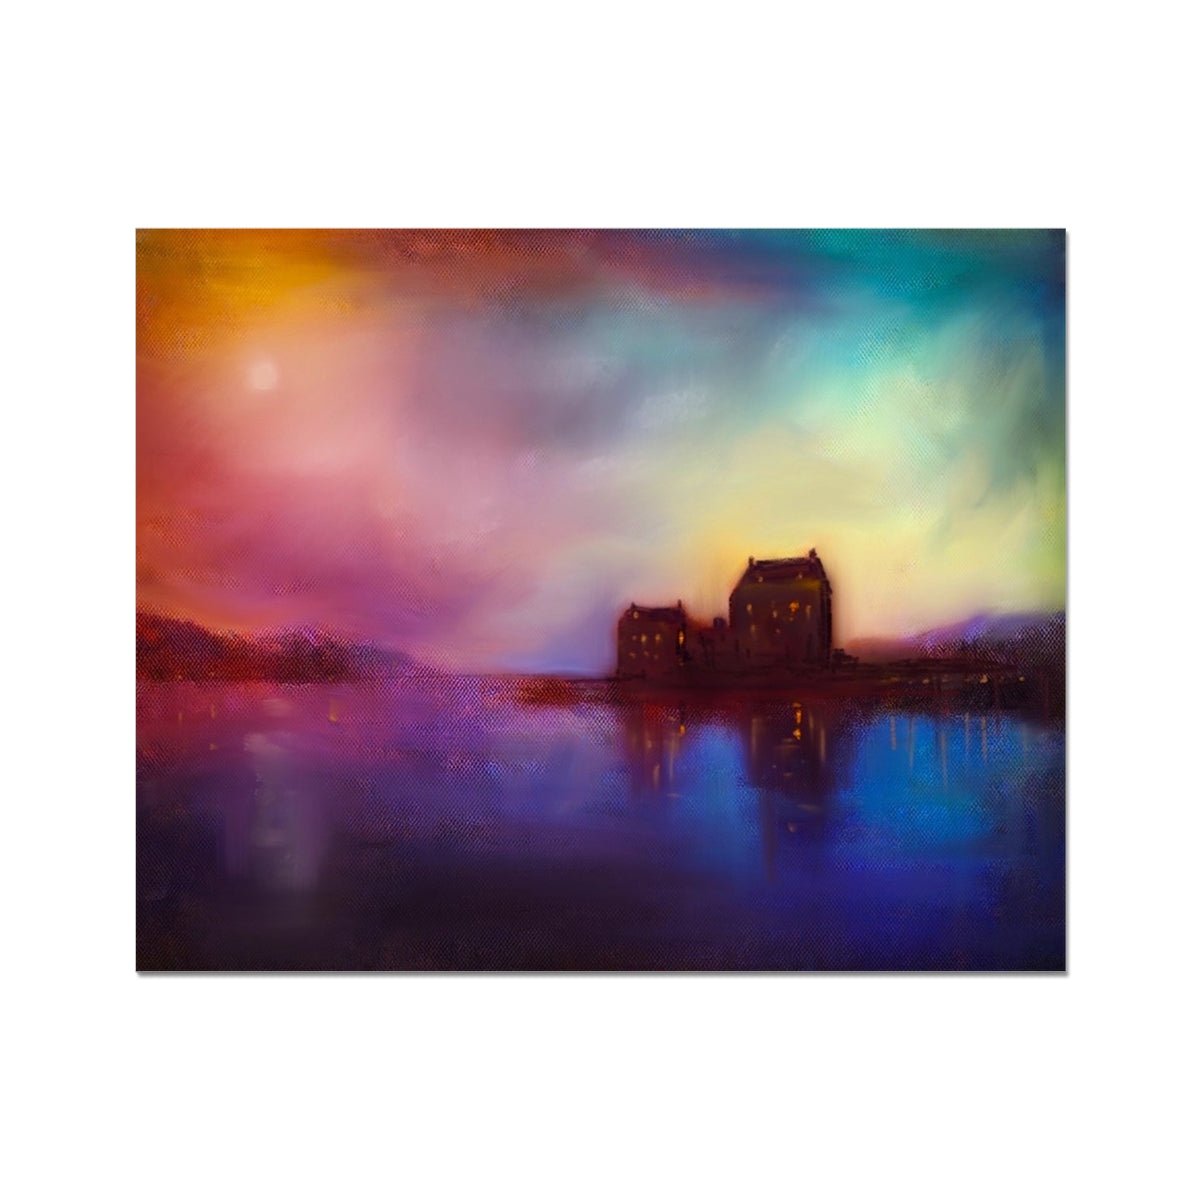 Eilean Donan Castle Sunset Painting | Artist Proof Collector Prints From Scotland-Artist Proof Collector Prints-Historic & Iconic Scotland Art Gallery-20"x16"-Paintings, Prints, Homeware, Art Gifts From Scotland By Scottish Artist Kevin Hunter